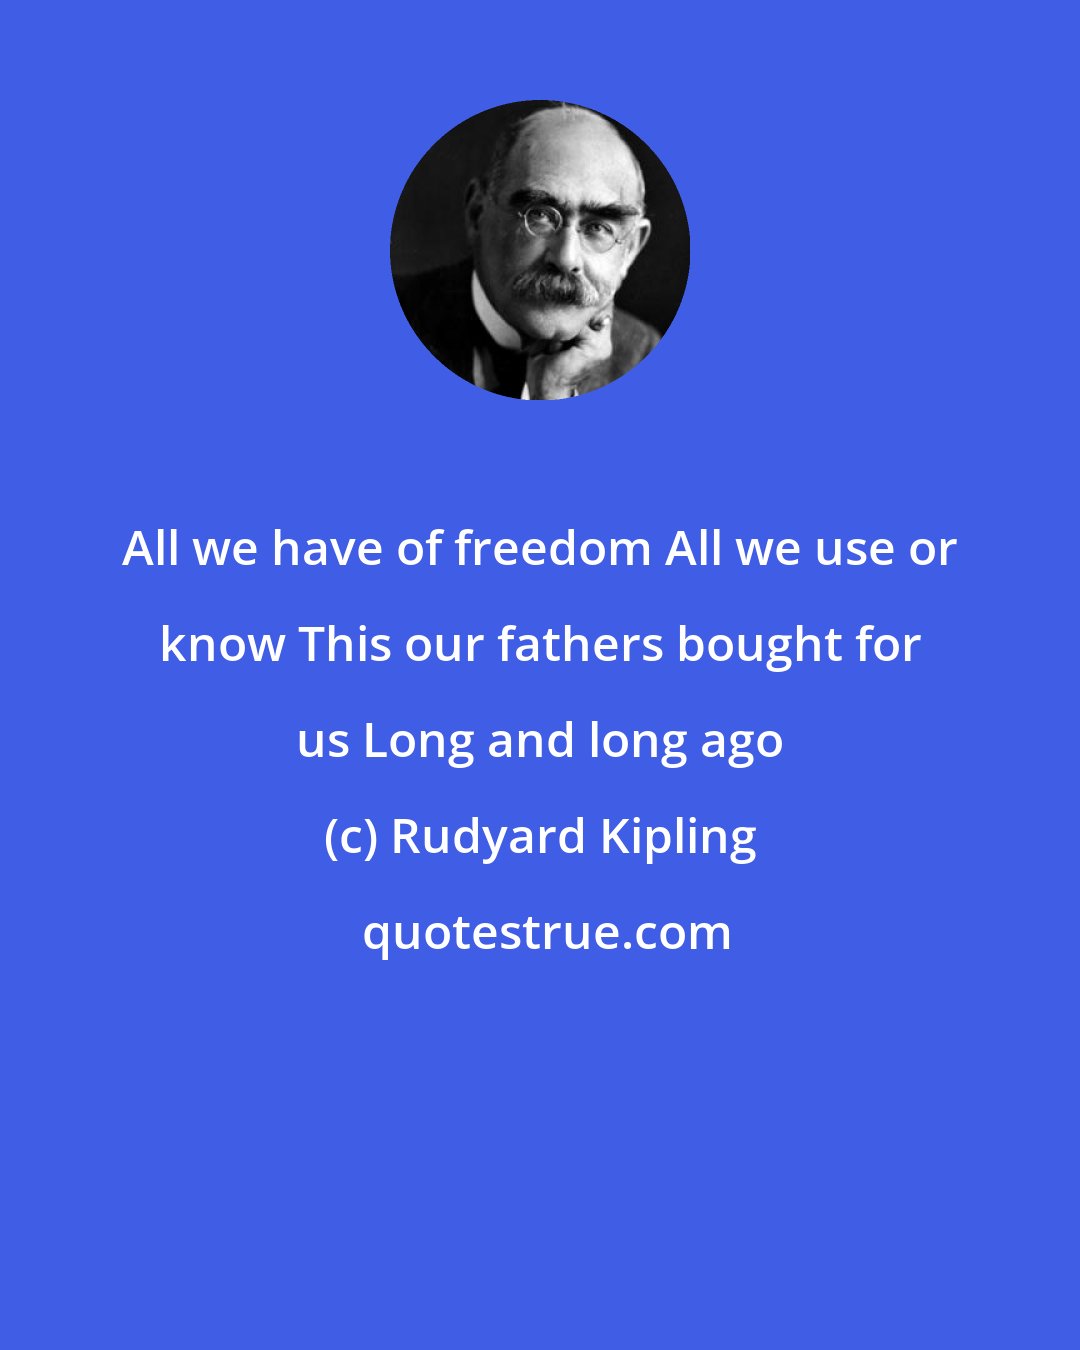 Rudyard Kipling: All we have of freedom All we use or know This our fathers bought for us Long and long ago